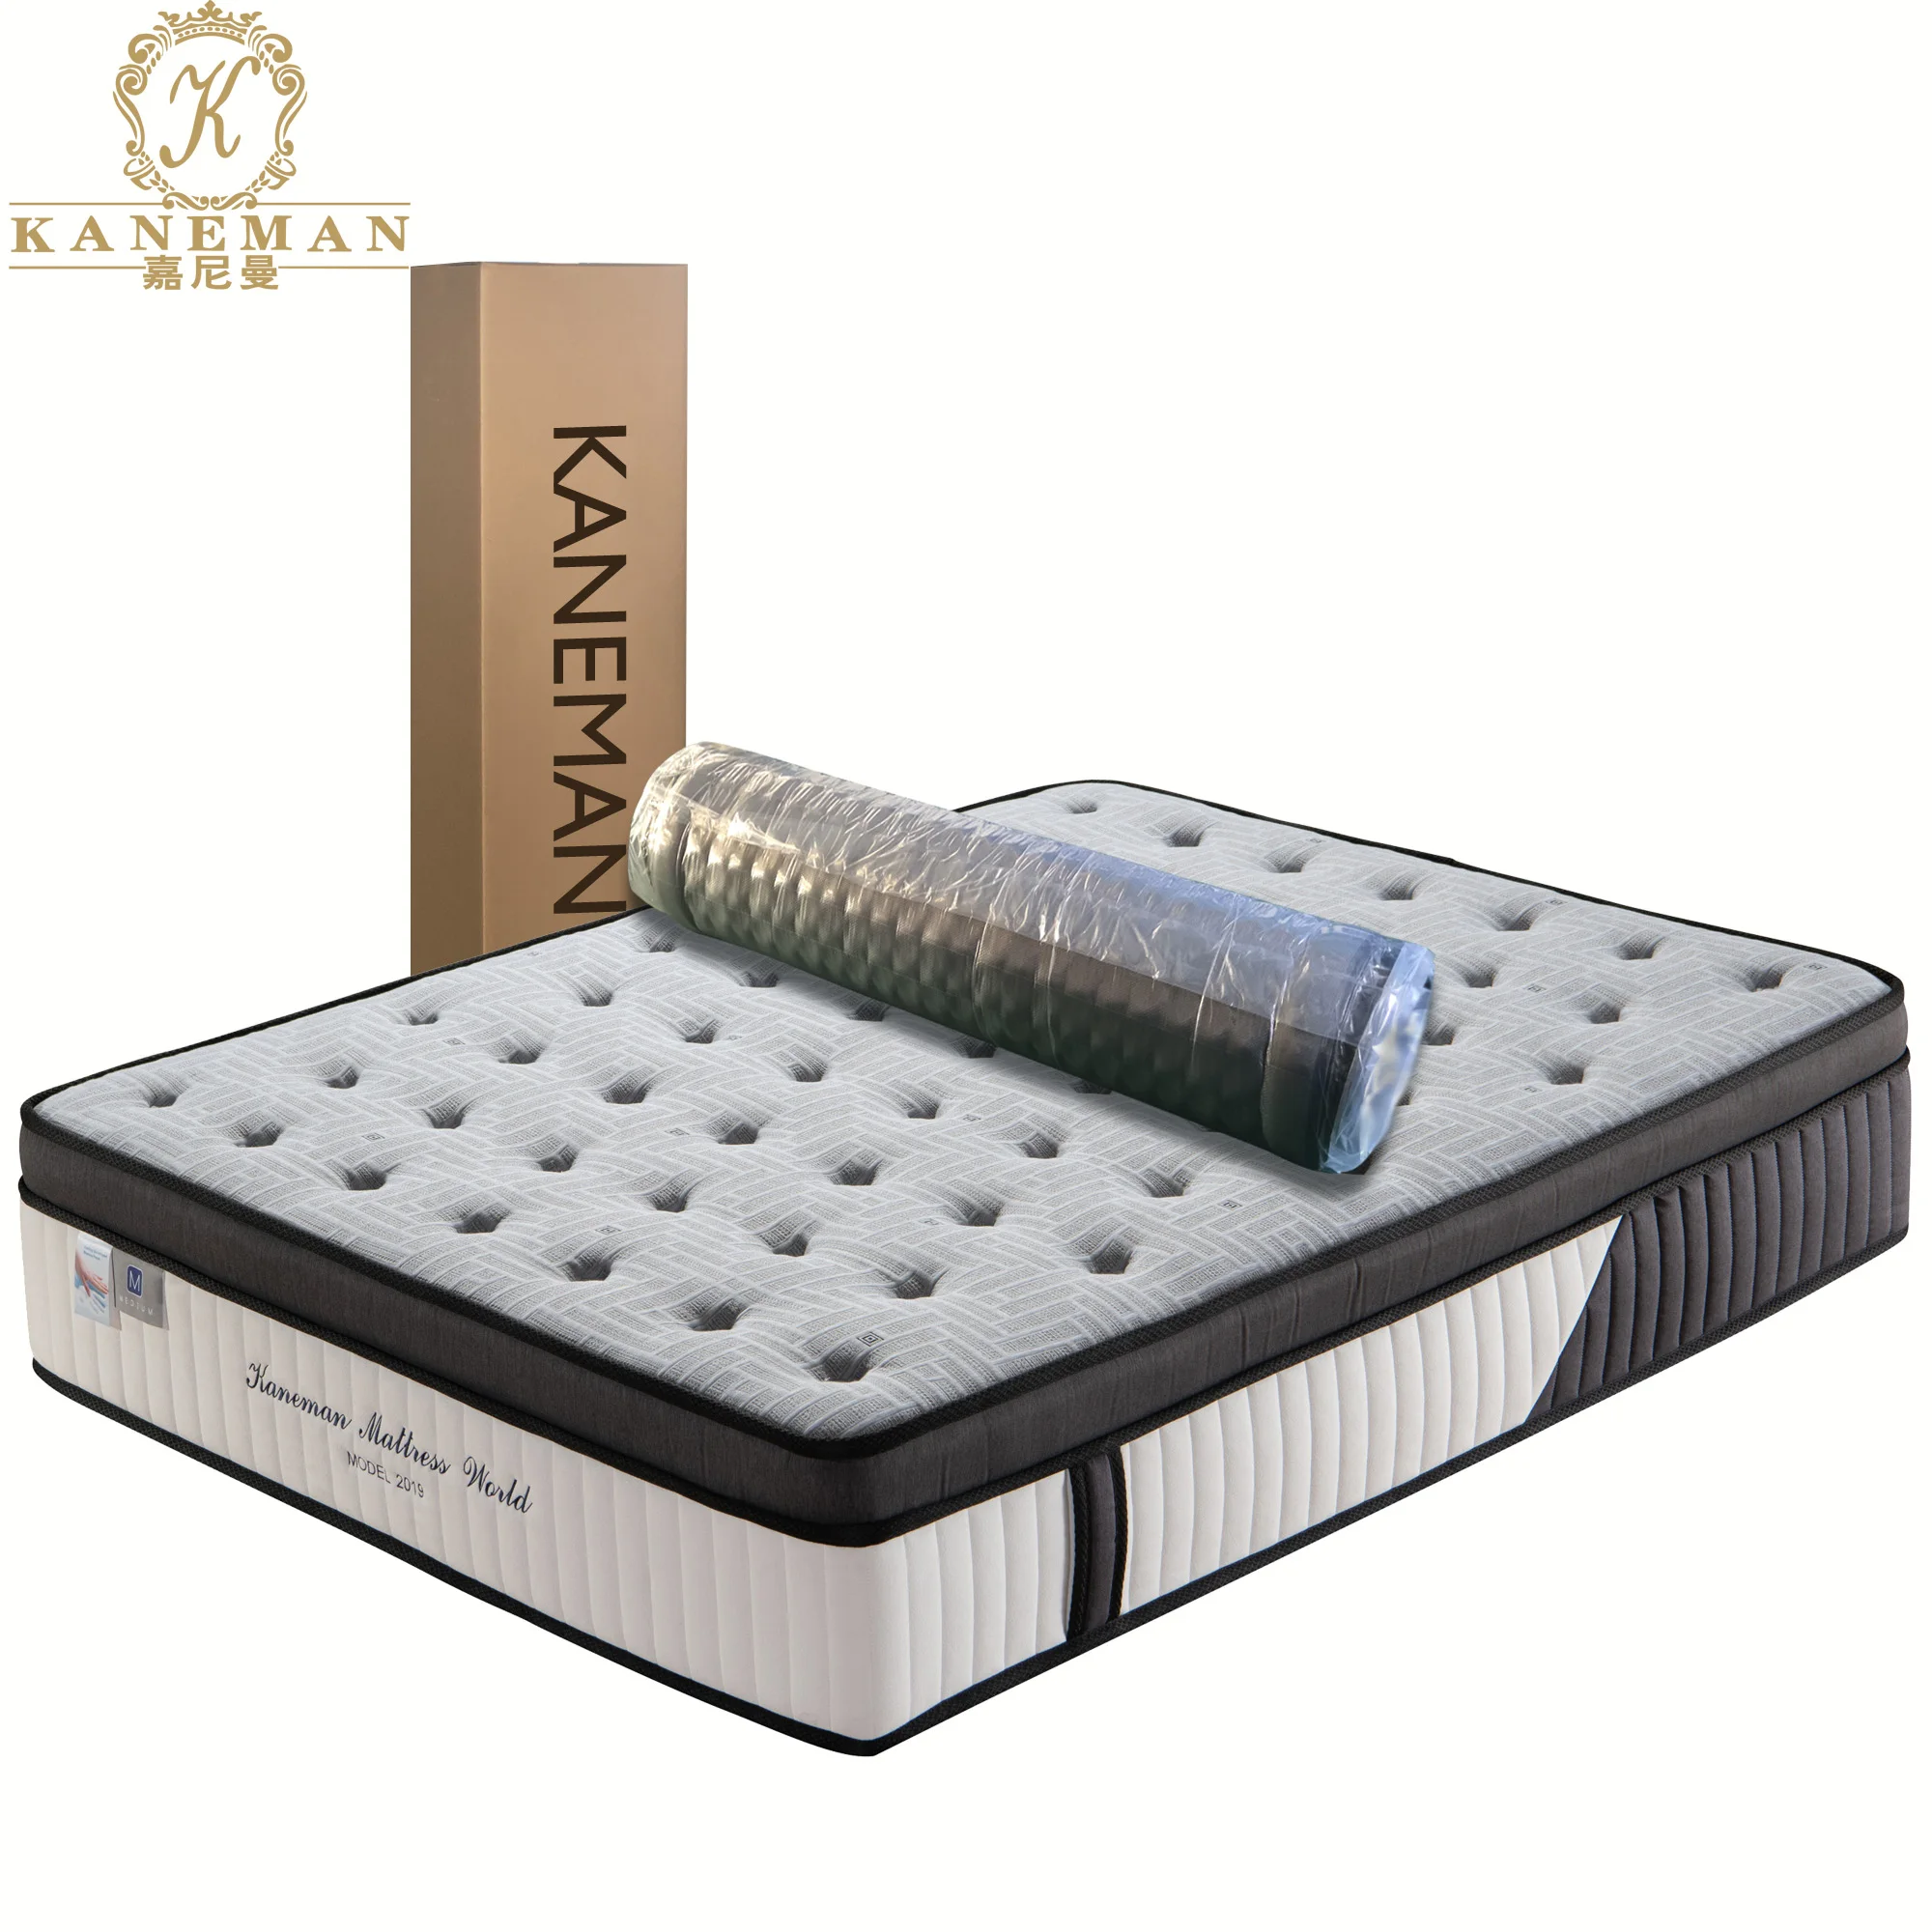 

13 Inch Vacuum Roll Up Packing Wholesale Queen King Size Memory Foam Pocket Spring Mattress In A Box, As the sample/your choice/any